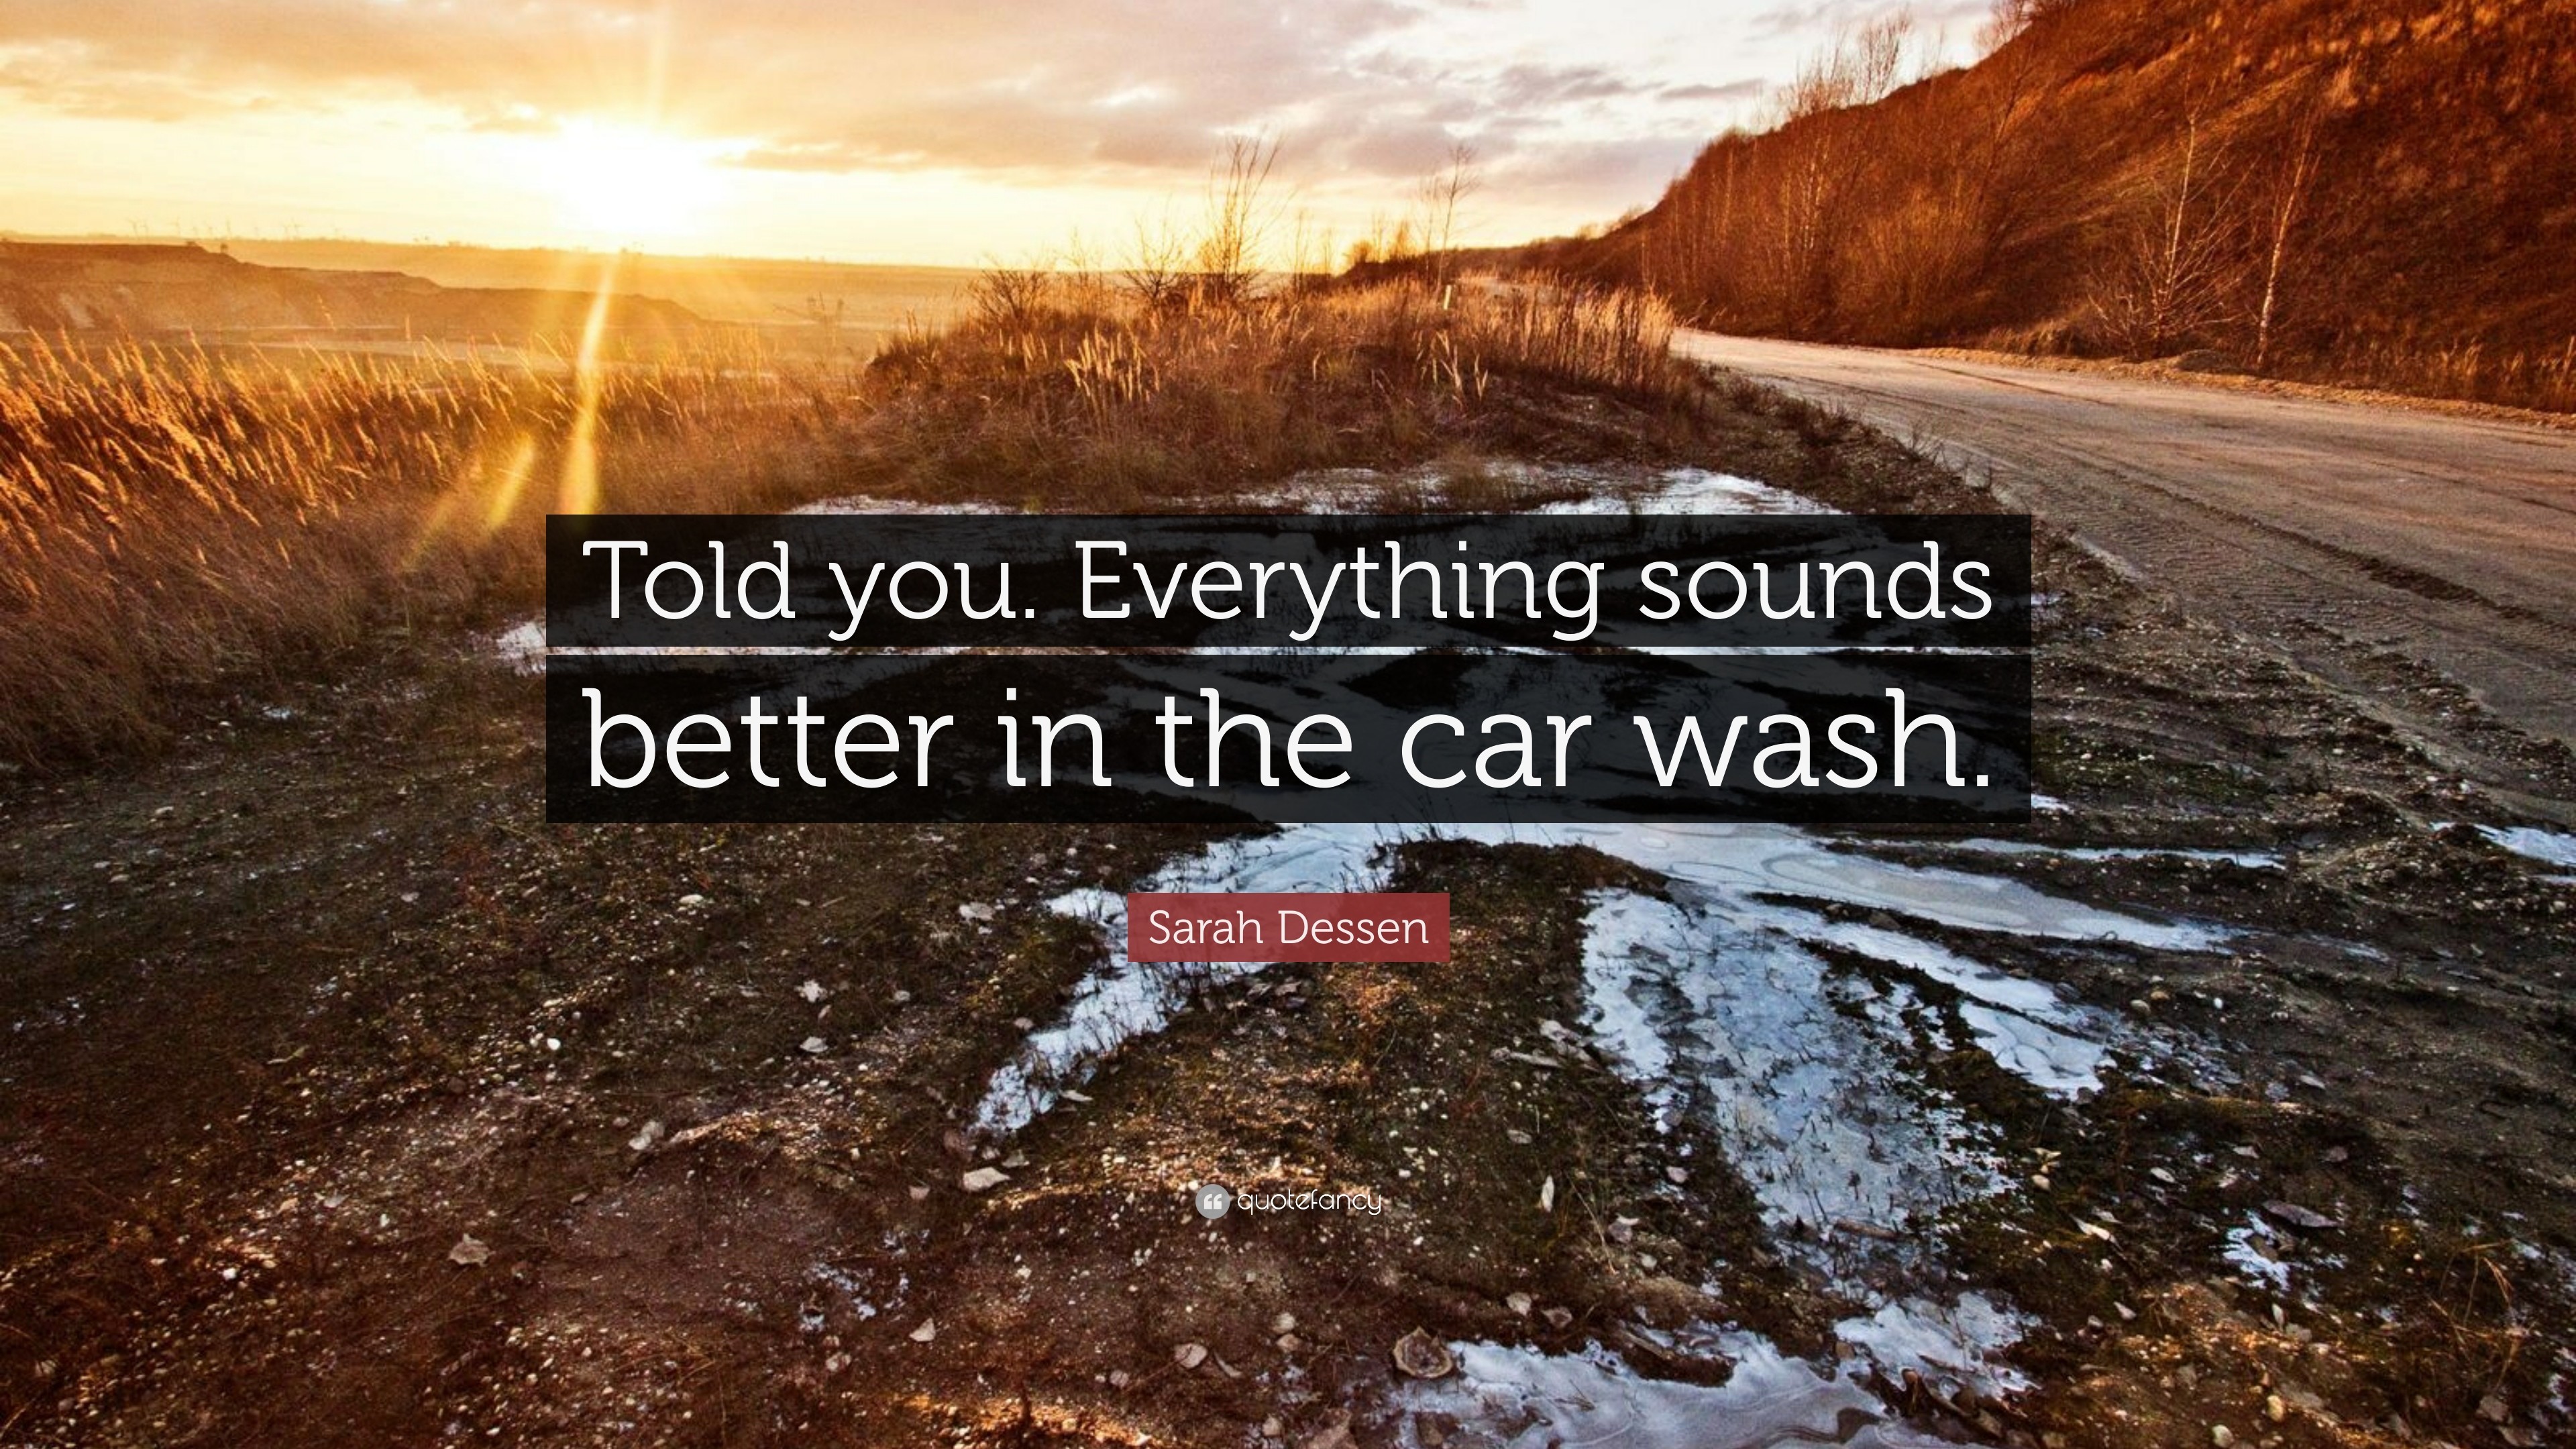 3840x2160 7 wallpapers. Sarah Dessen Quote: “Told you. Everything sounds better in  the car wash.